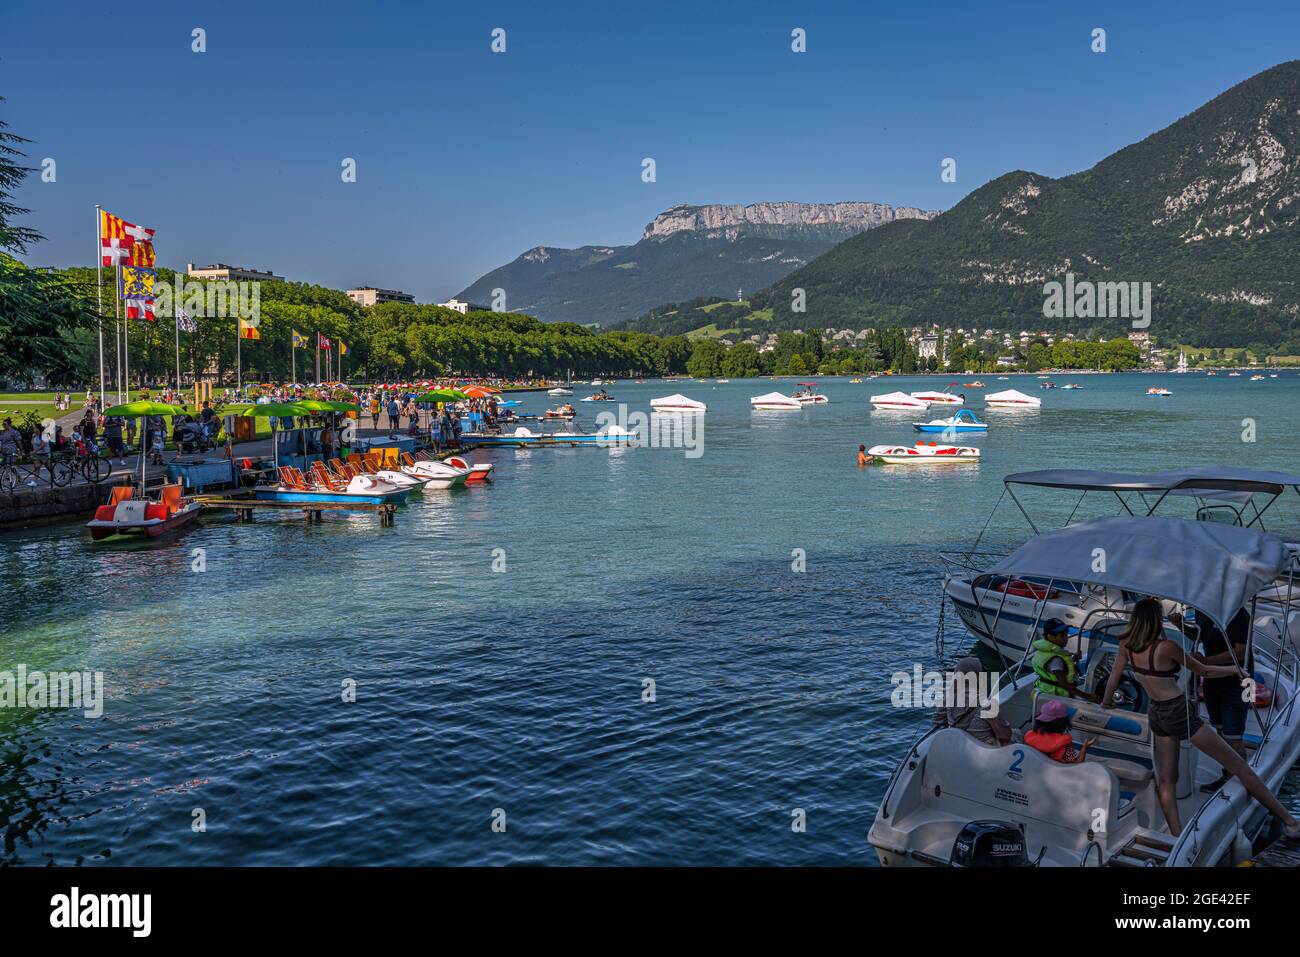 Summer fun on a summer day on Lake Annecy. Tourists on pedal boats and under umbrellas. Annecy, Savoie department, Auvergne-Rhône-Alpes region, France Stock Photo